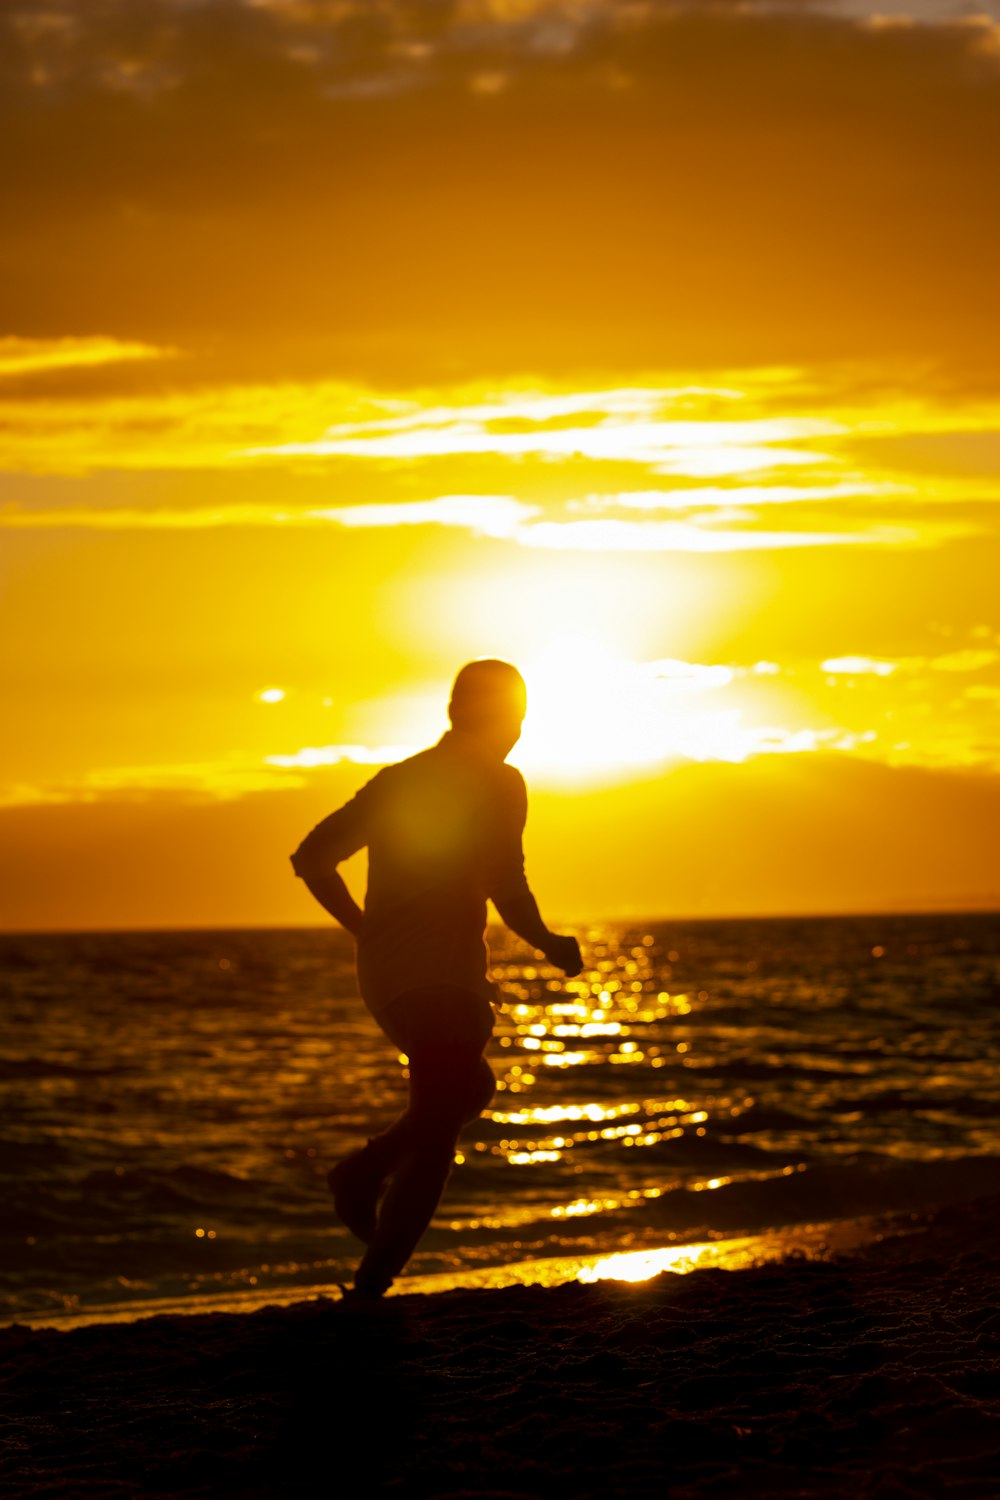 silhouette of man running on beach during sunset